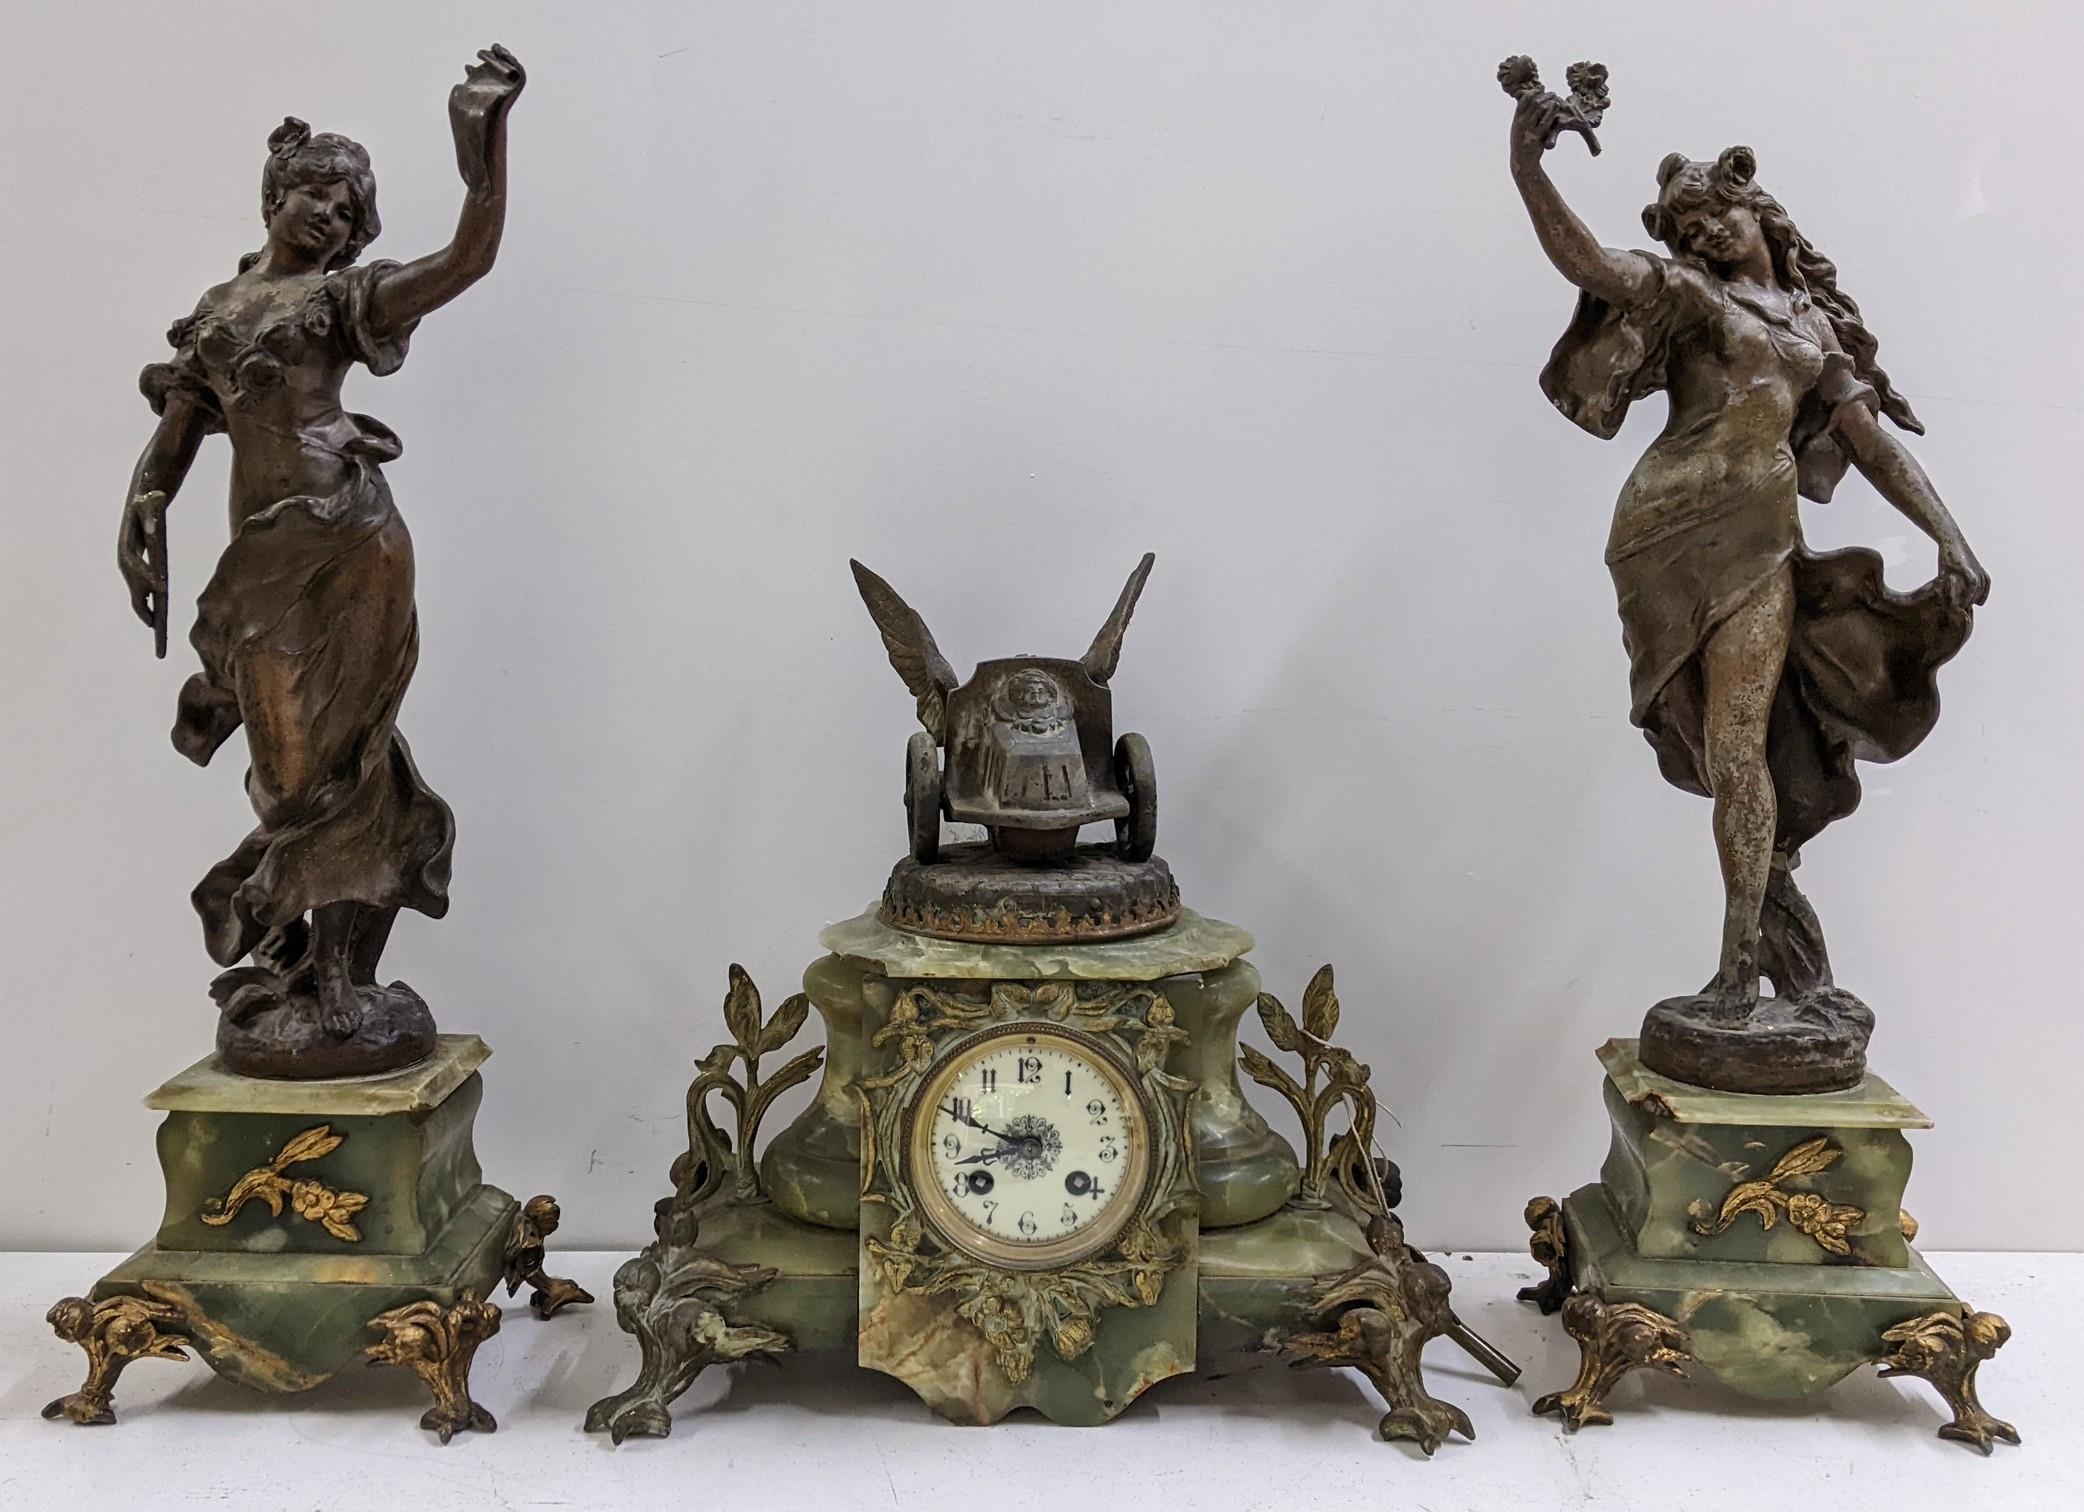 A late 19th century French onyx clock garniture set applied with gilt metal mounts and spelter